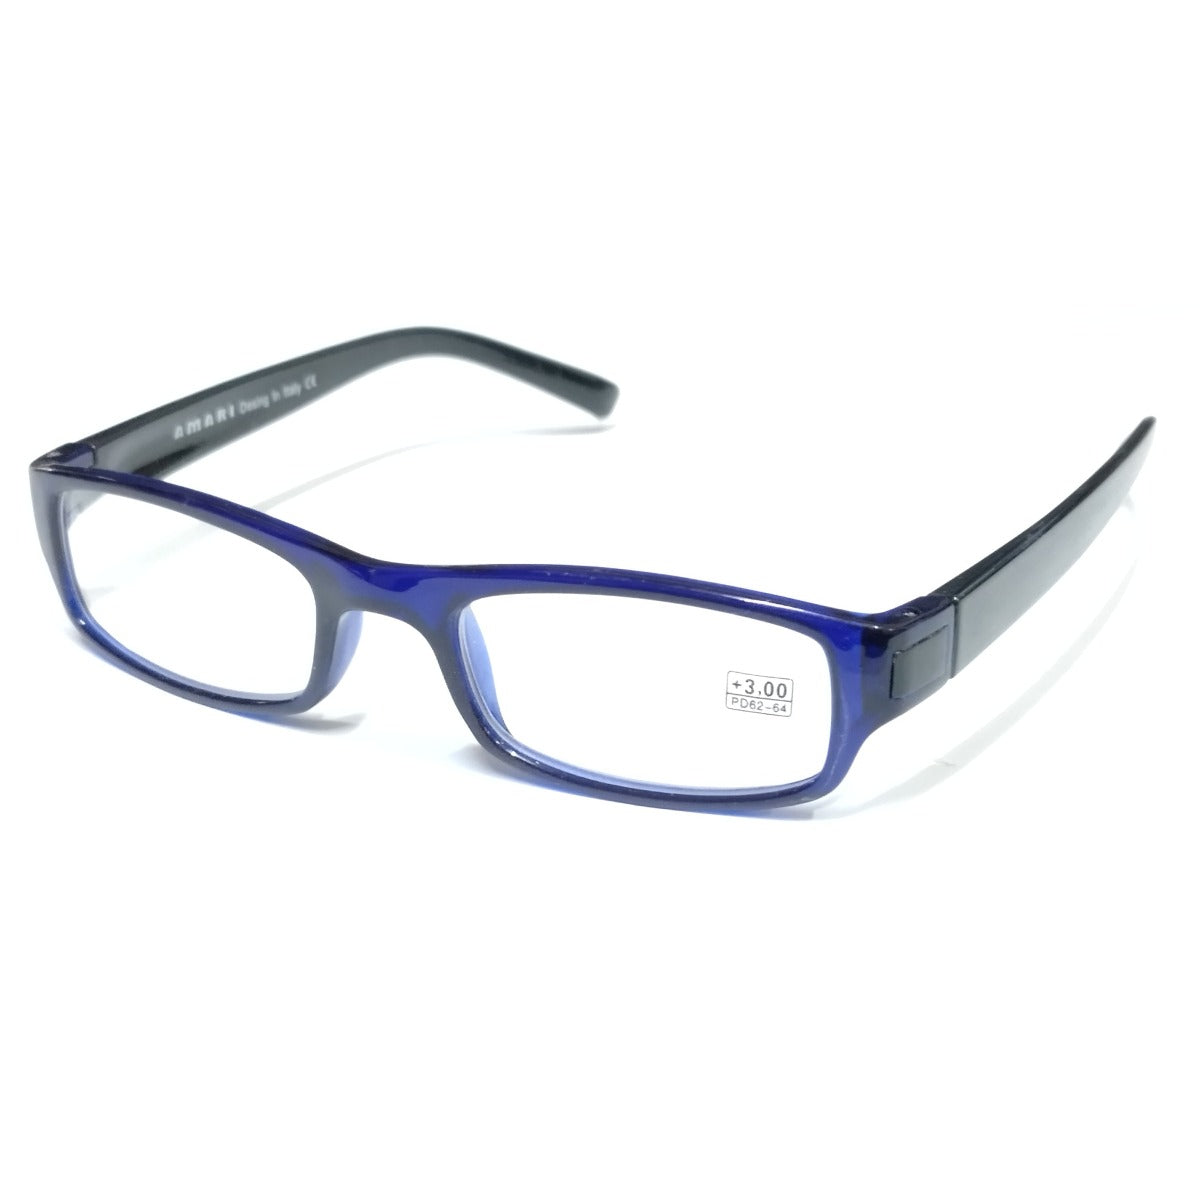 Stylish and Functional Computer Reading Glasses in Blue and Black